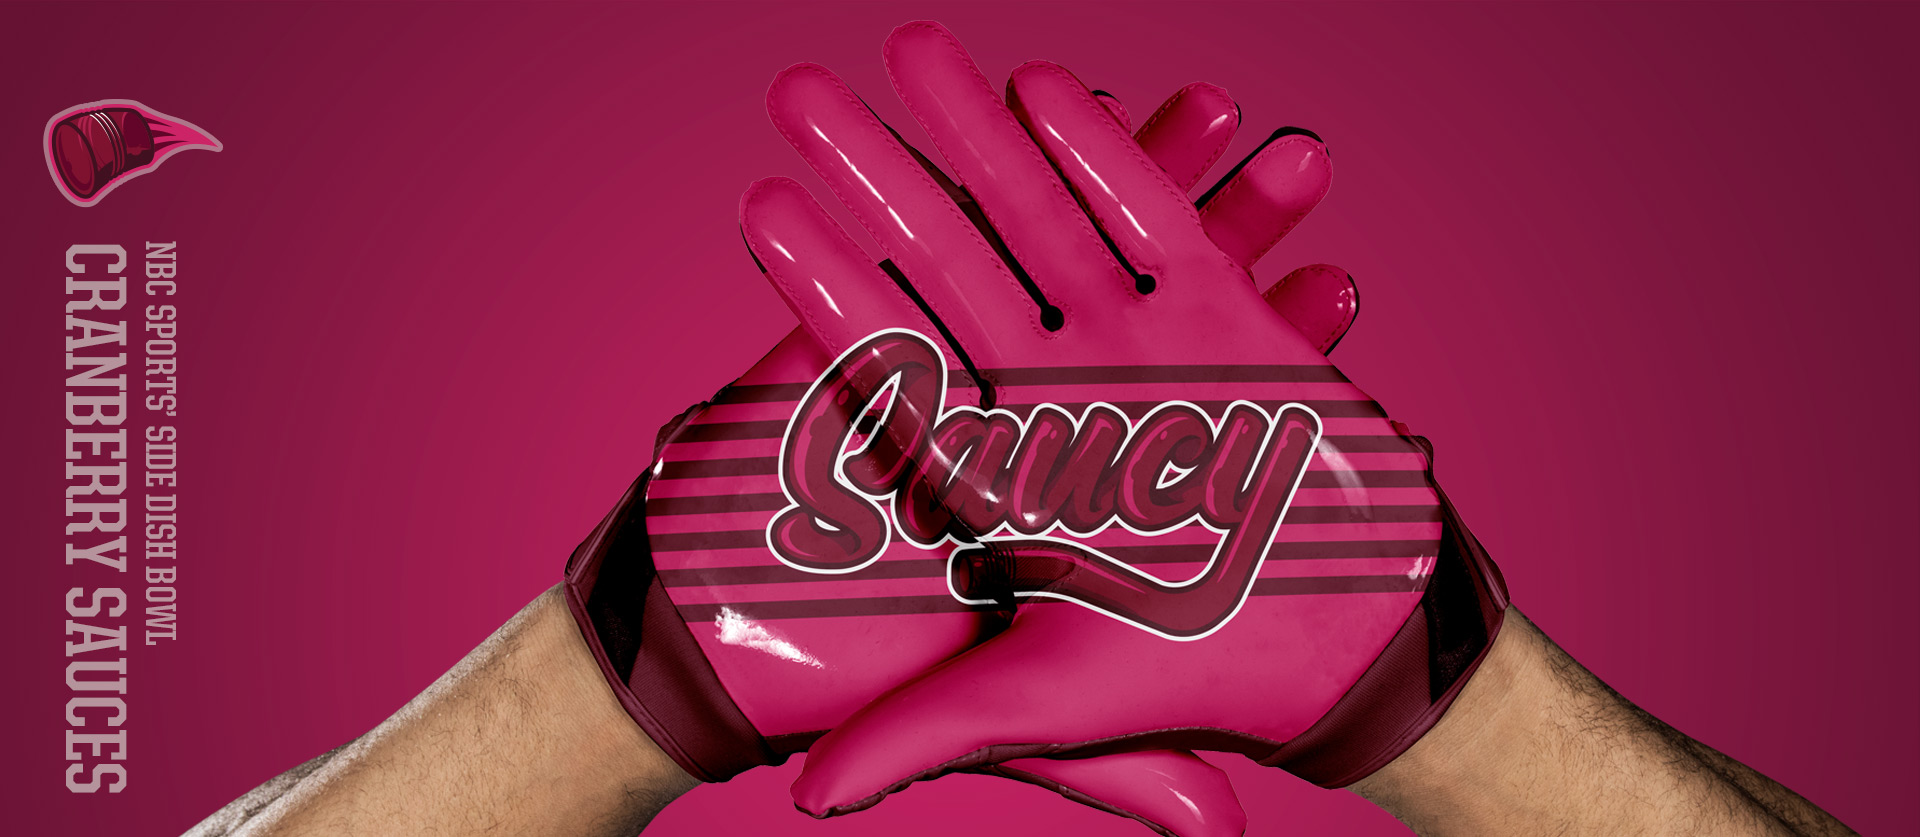 Cranberry Sauces Gloves - Football Uniform Design for NBC Sports Thanksgiving Side Dish Bowl